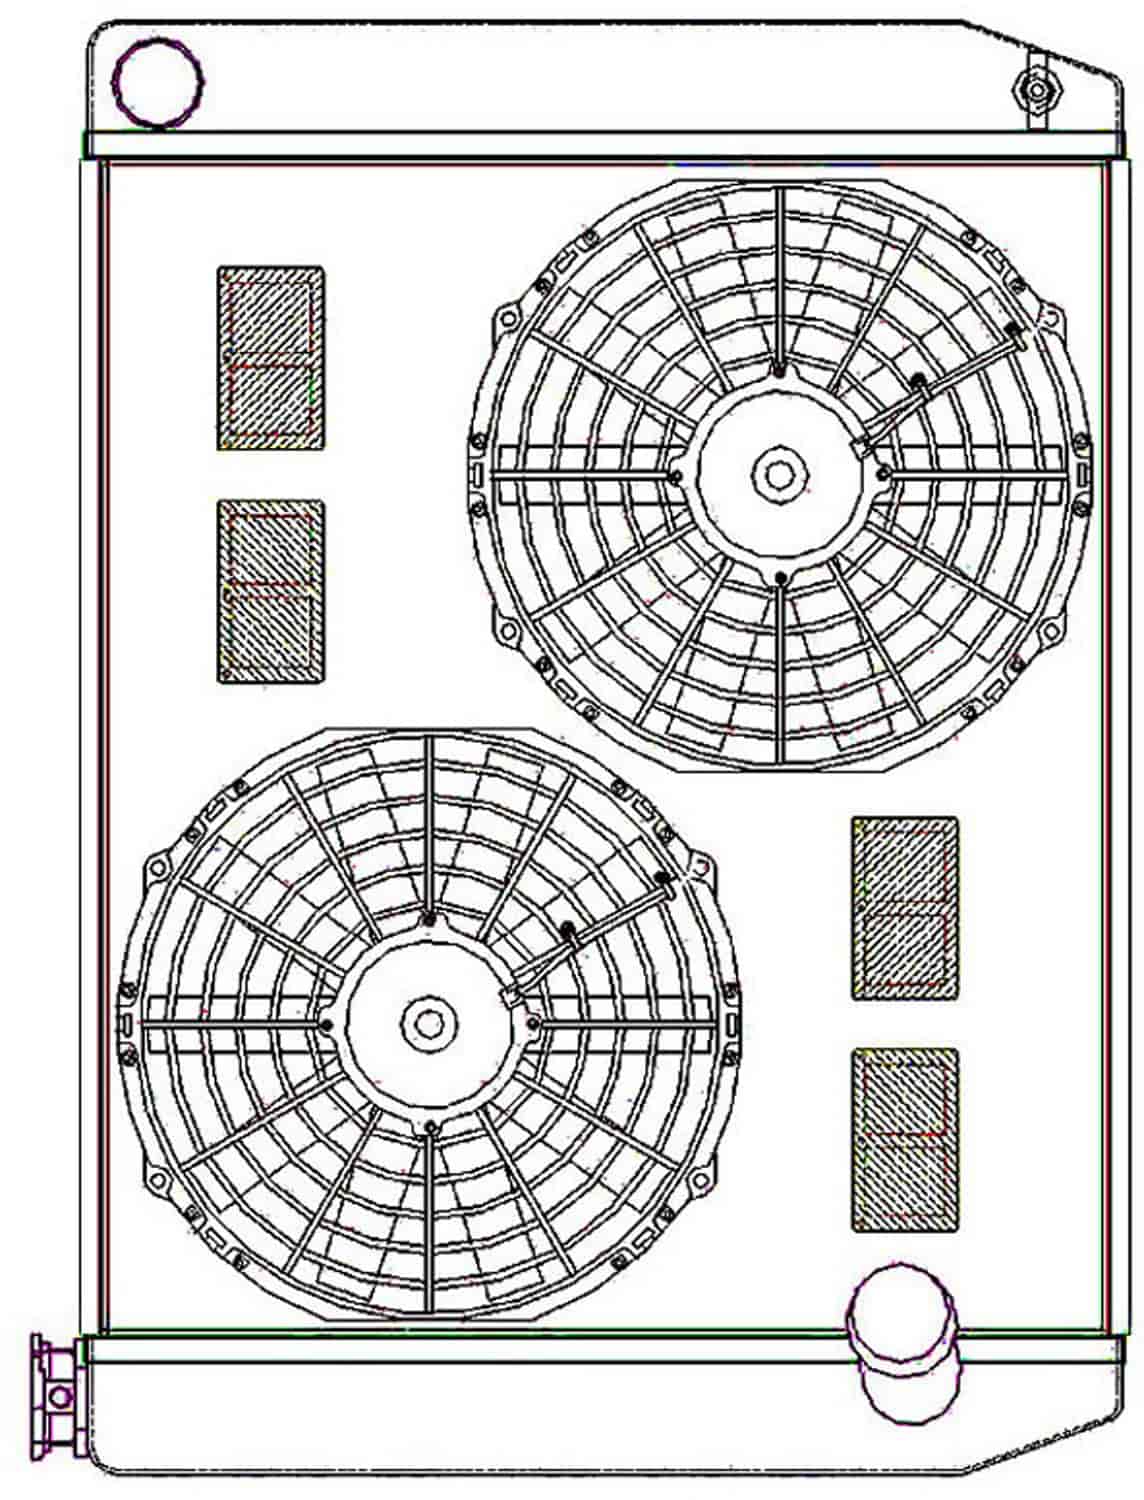 ClassicCool ComboUnit Universal Fit Radiator and Fan Single Pass Crossflow Design 26" x 19" with No Options